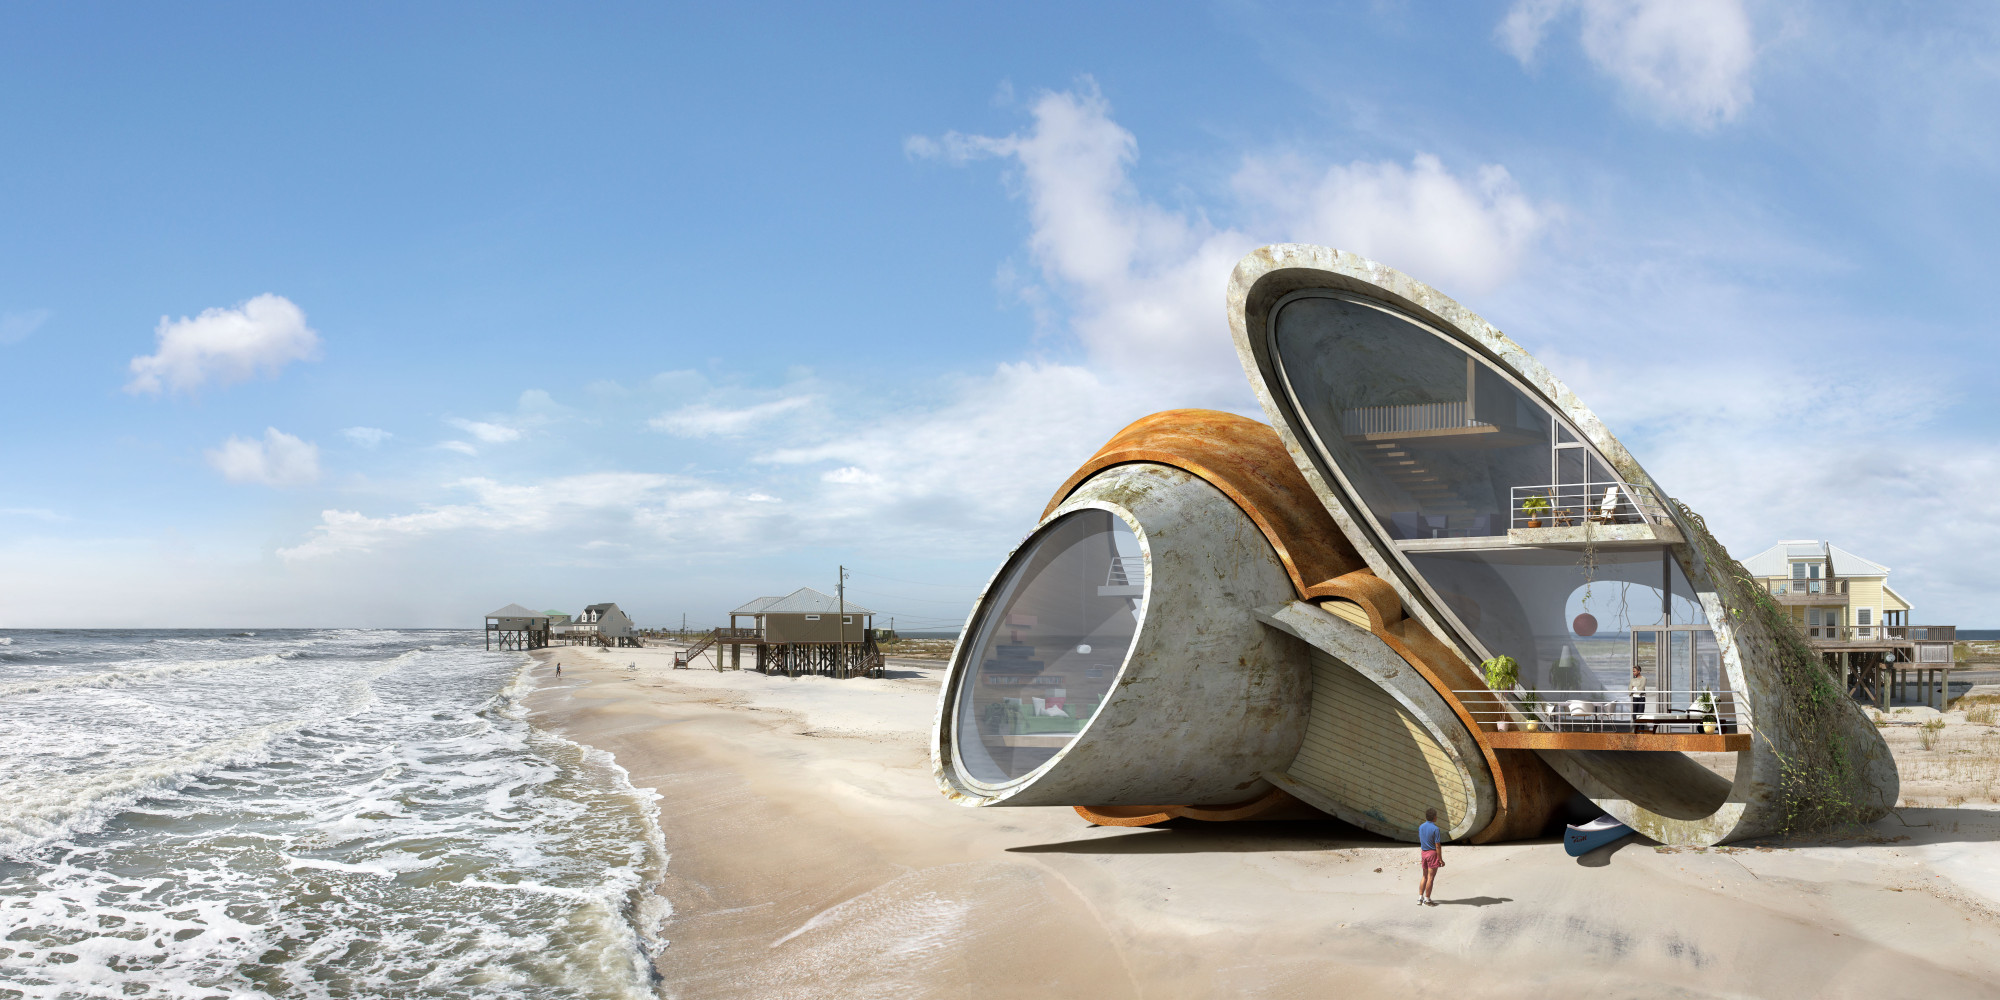 Artist Designs Surreal iFuturistici Forts That Can Withstand 